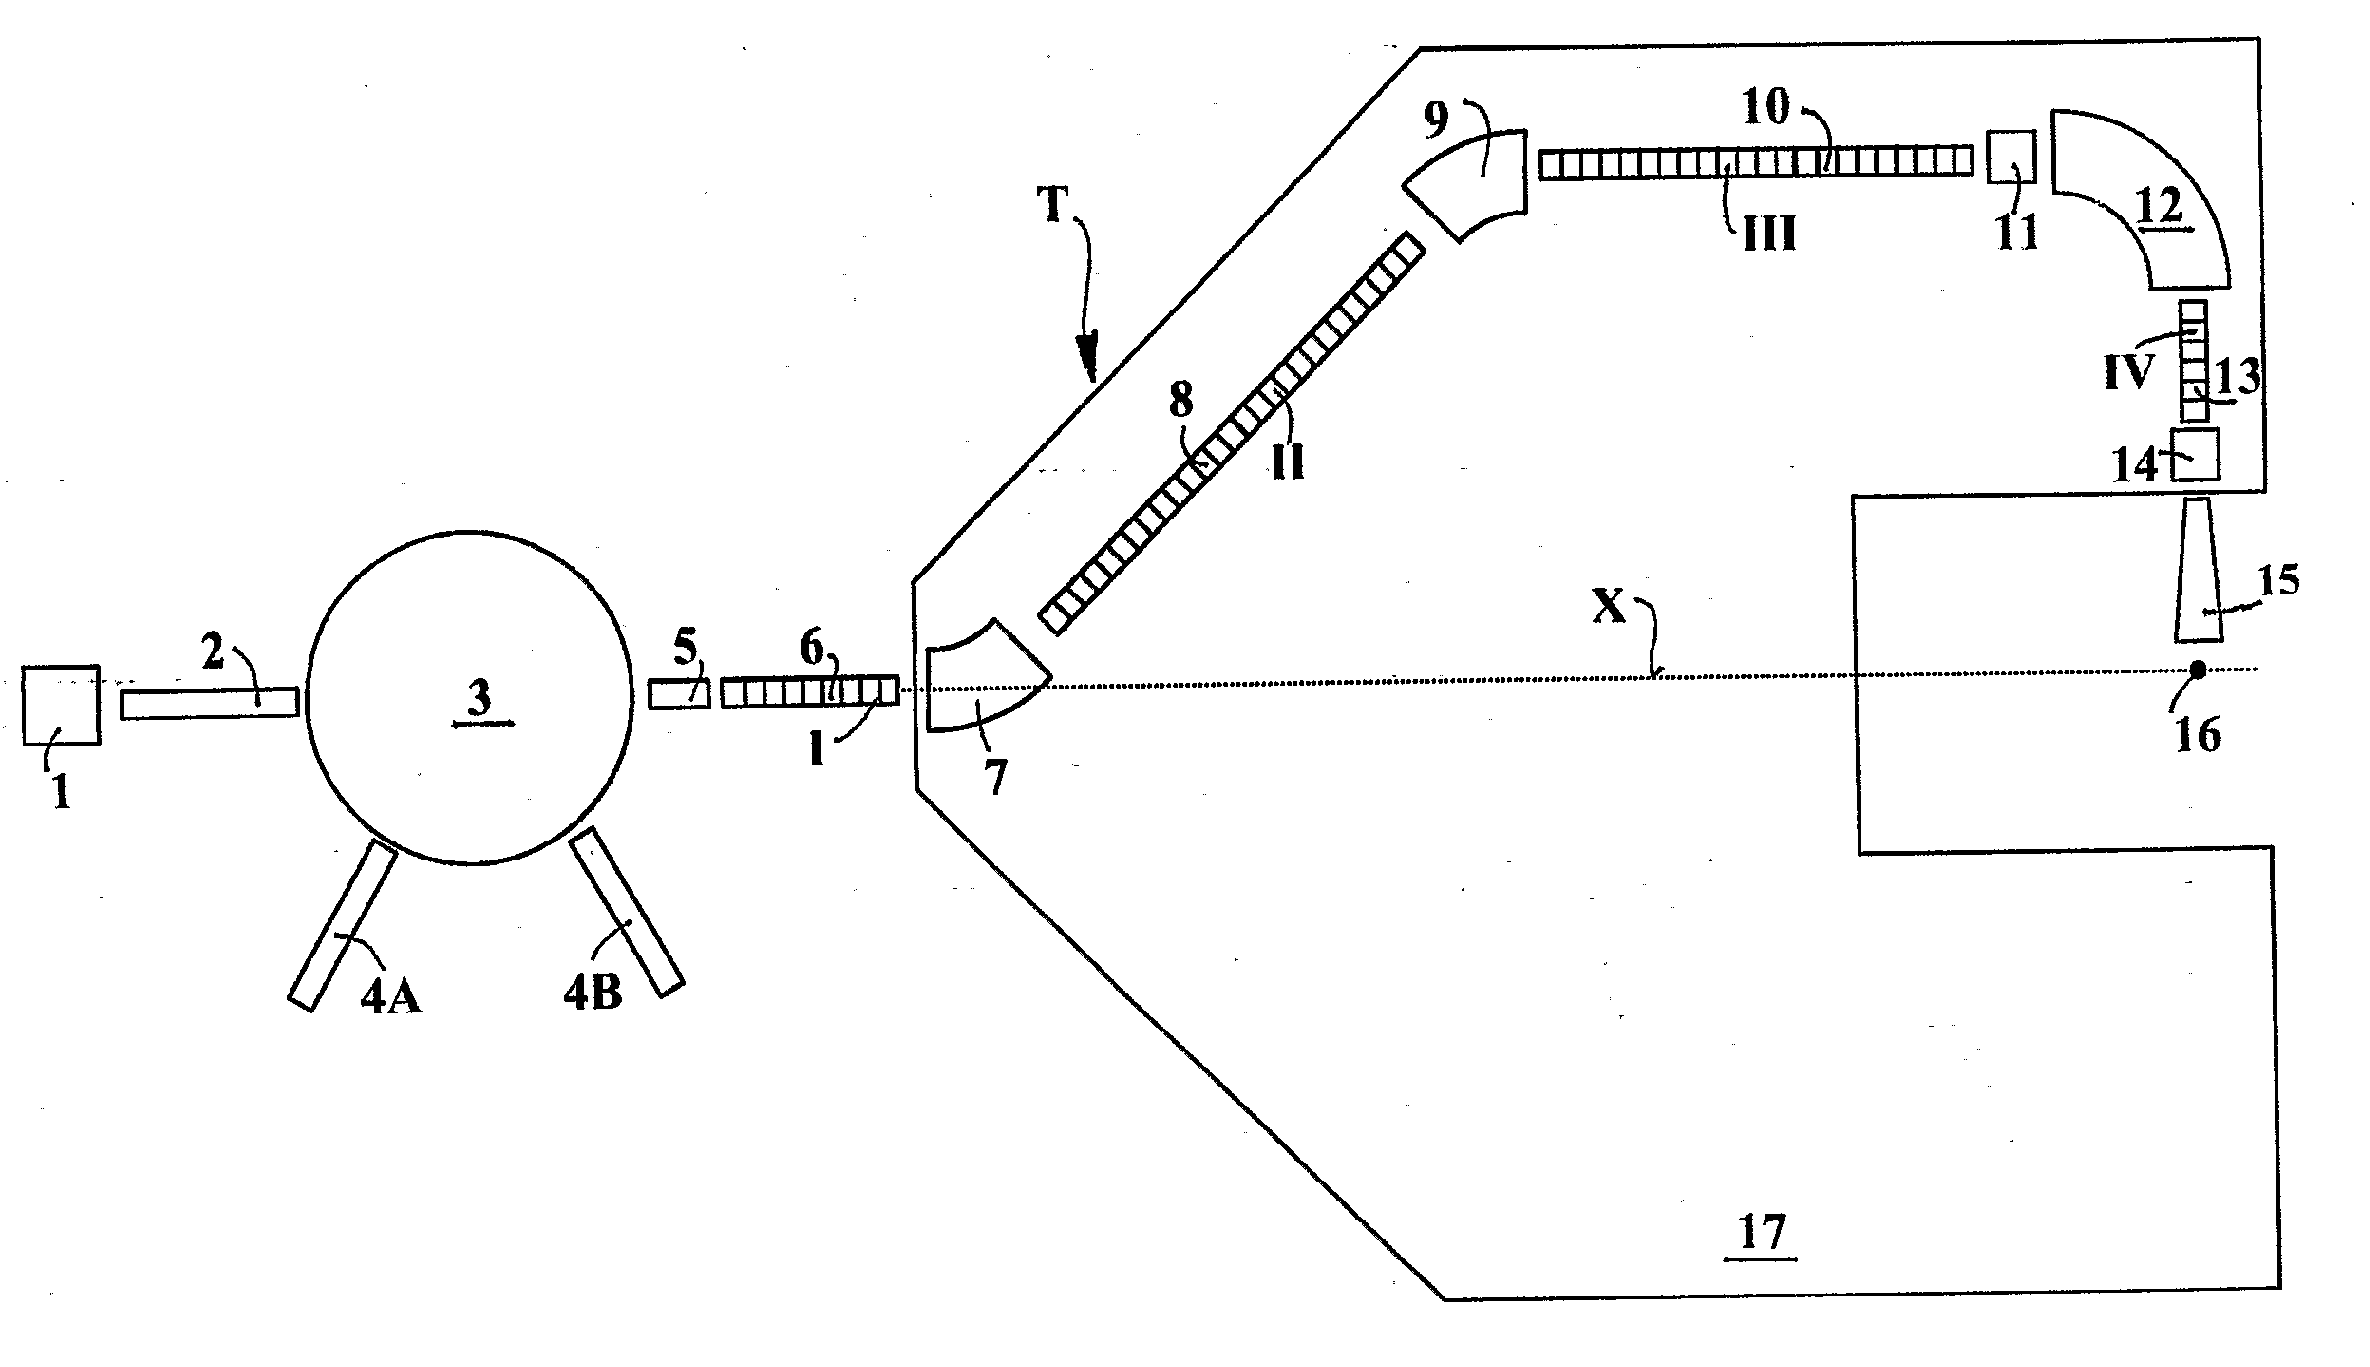 Ion acceleration system for medical and/or other applications